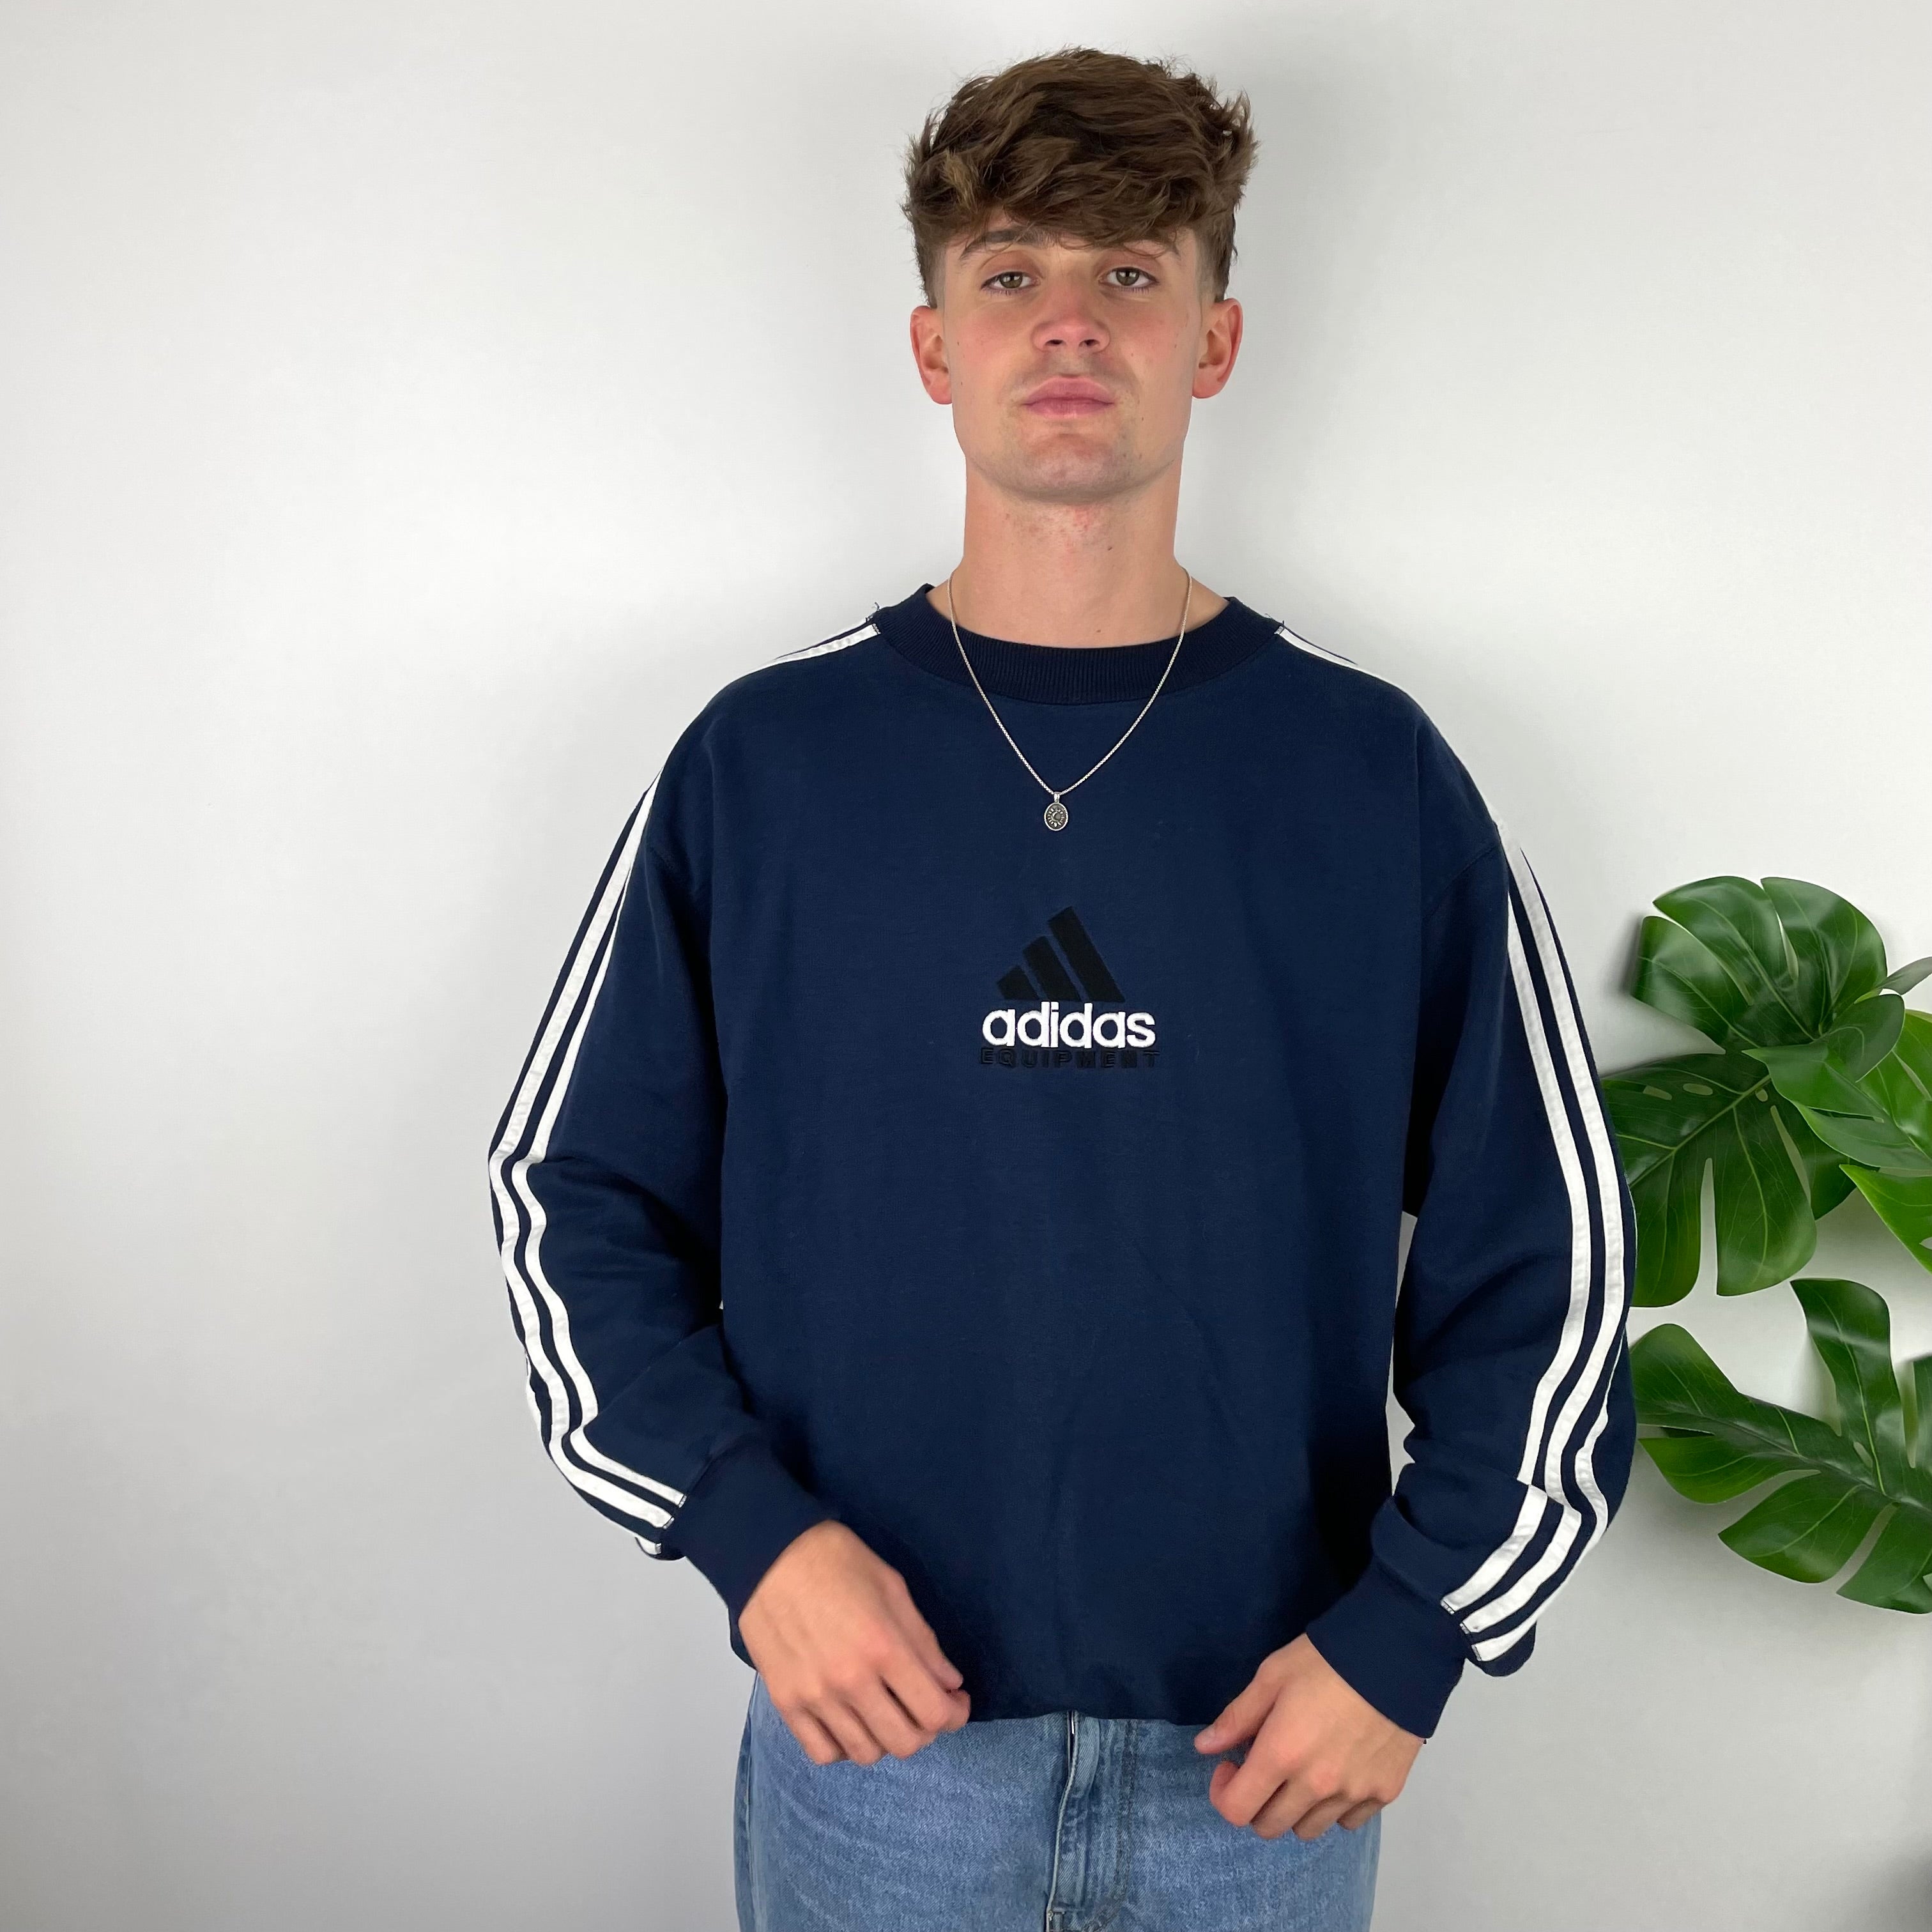 Adidas Equipment RARE Navy Embroidered Spell Out Sweatshirt (XL)